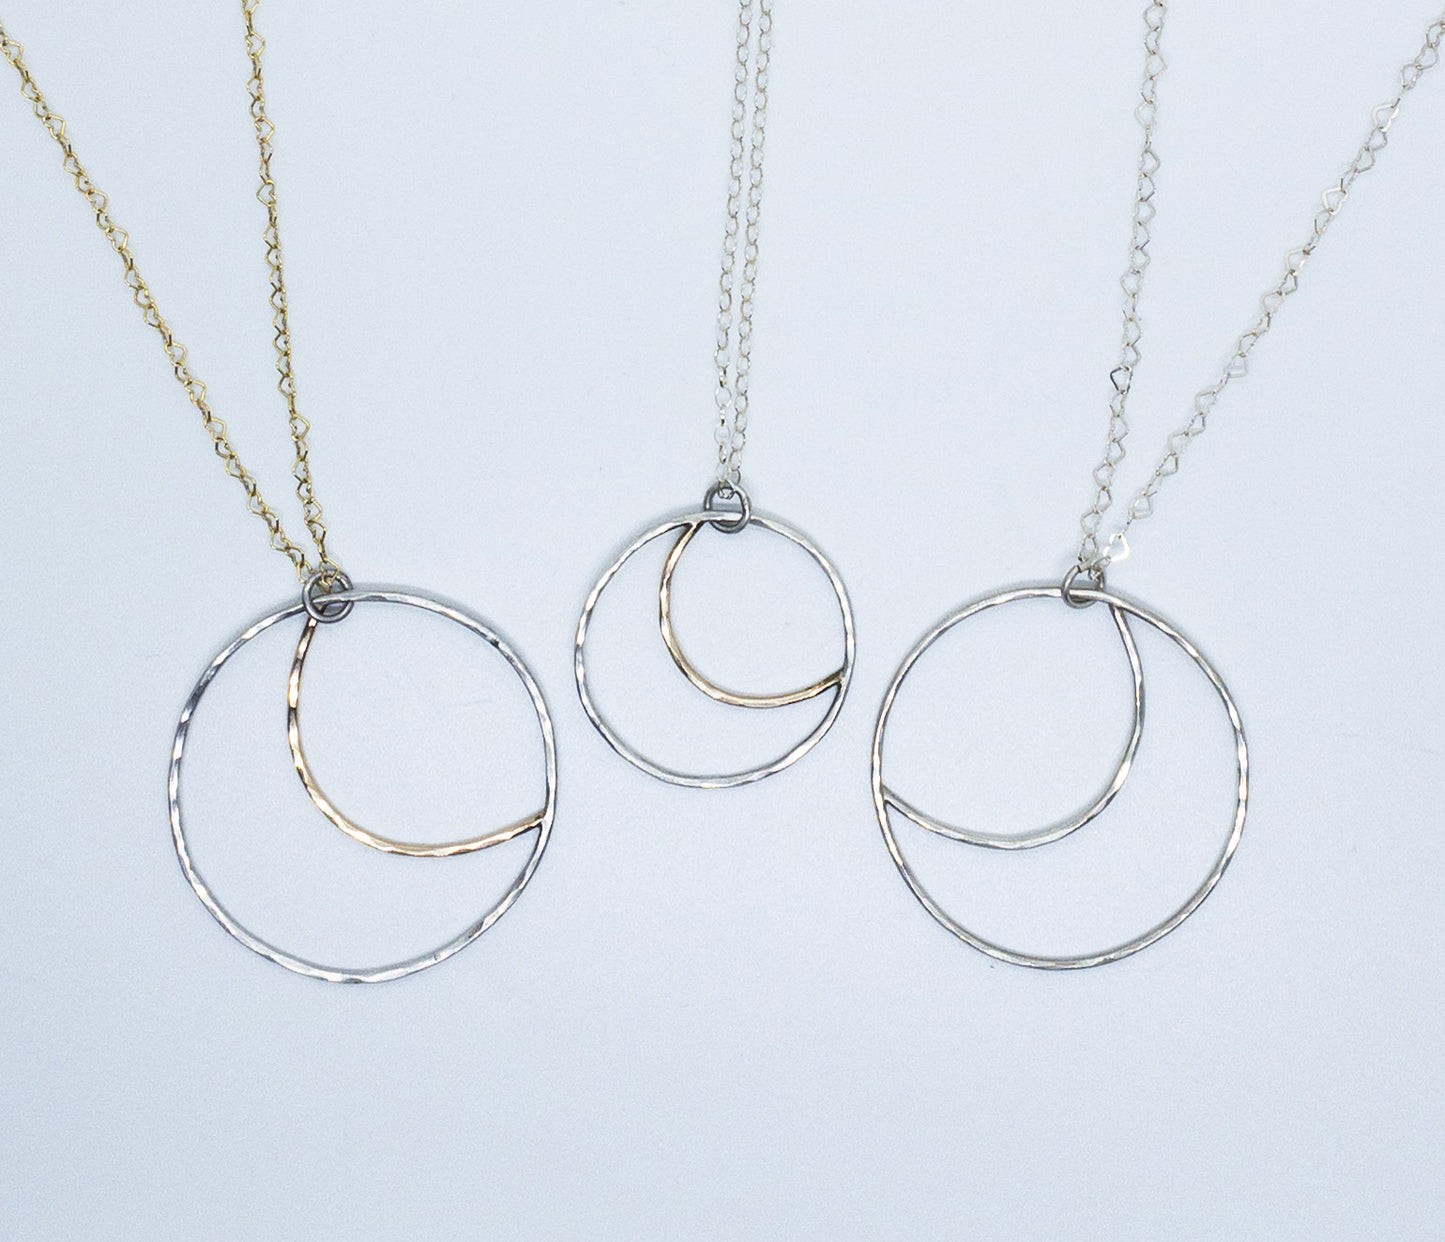 Small Sterling and Gold Moon Phases Pendant - Sterling and 14 Karat Gold Filled Full Moon Necklace - Crescent Moon Pendant - Hammered Moon Jewelry